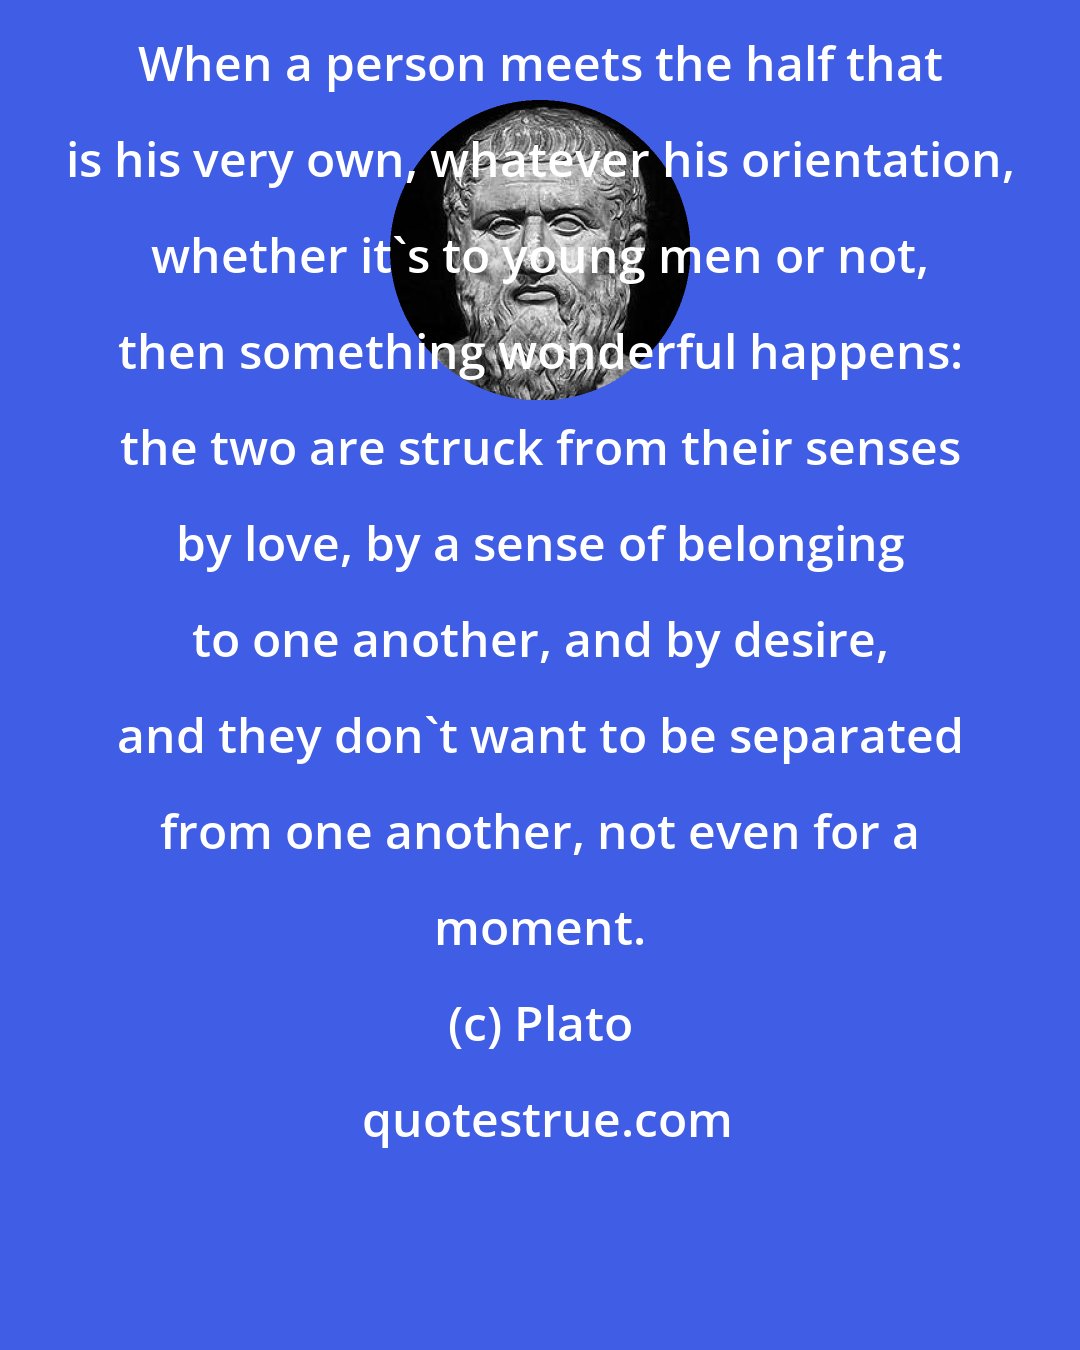 Plato: When a person meets the half that is his very own, whatever his orientation, whether it's to young men or not, then something wonderful happens: the two are struck from their senses by love, by a sense of belonging to one another, and by desire, and they don't want to be separated from one another, not even for a moment.